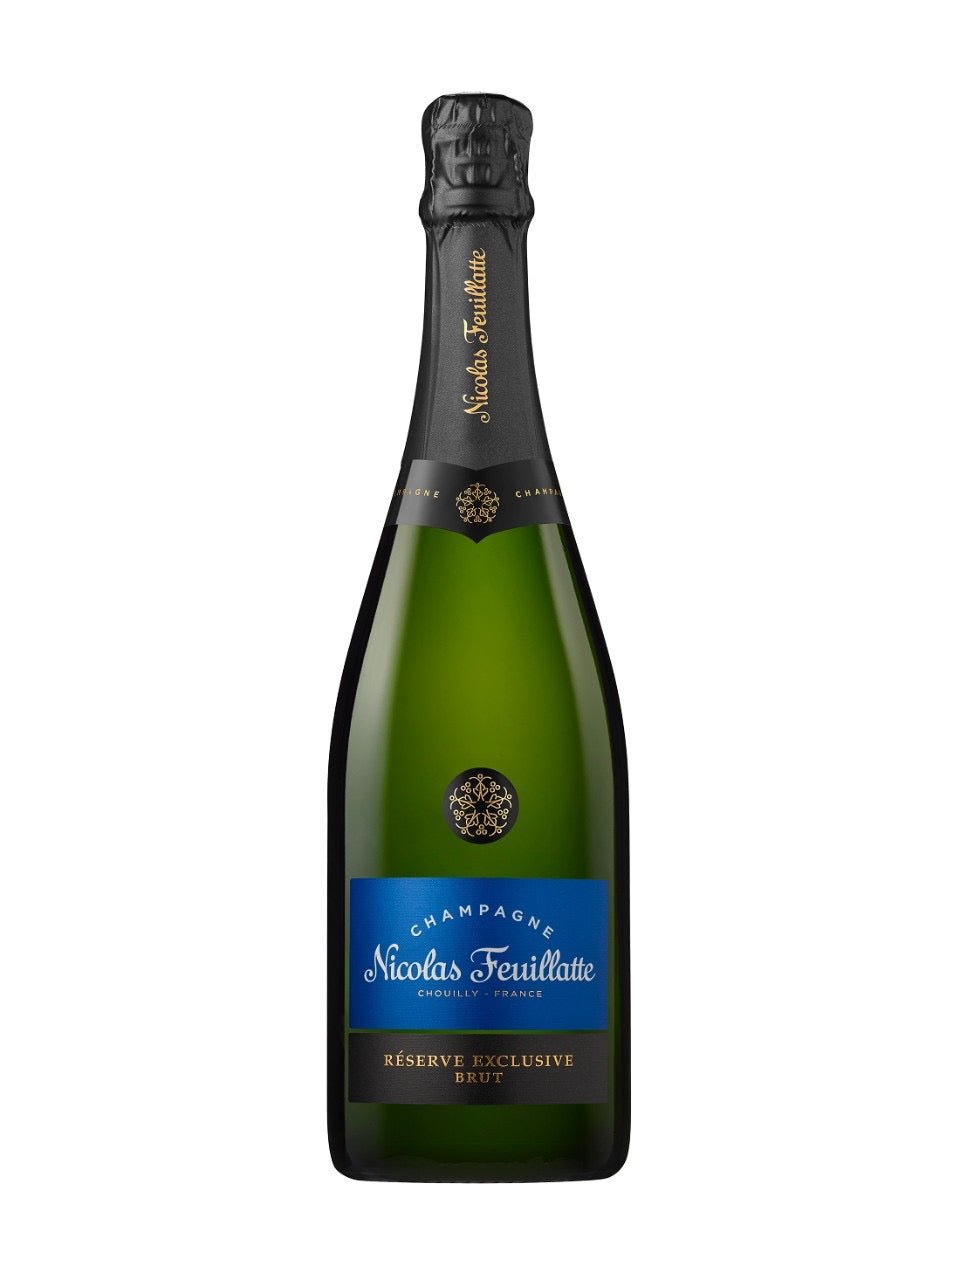 Nicolas Feuillatte Brut Champagne | Exquisite Wine & Alcohol Gift Delivery Toronto Canada | Vyno